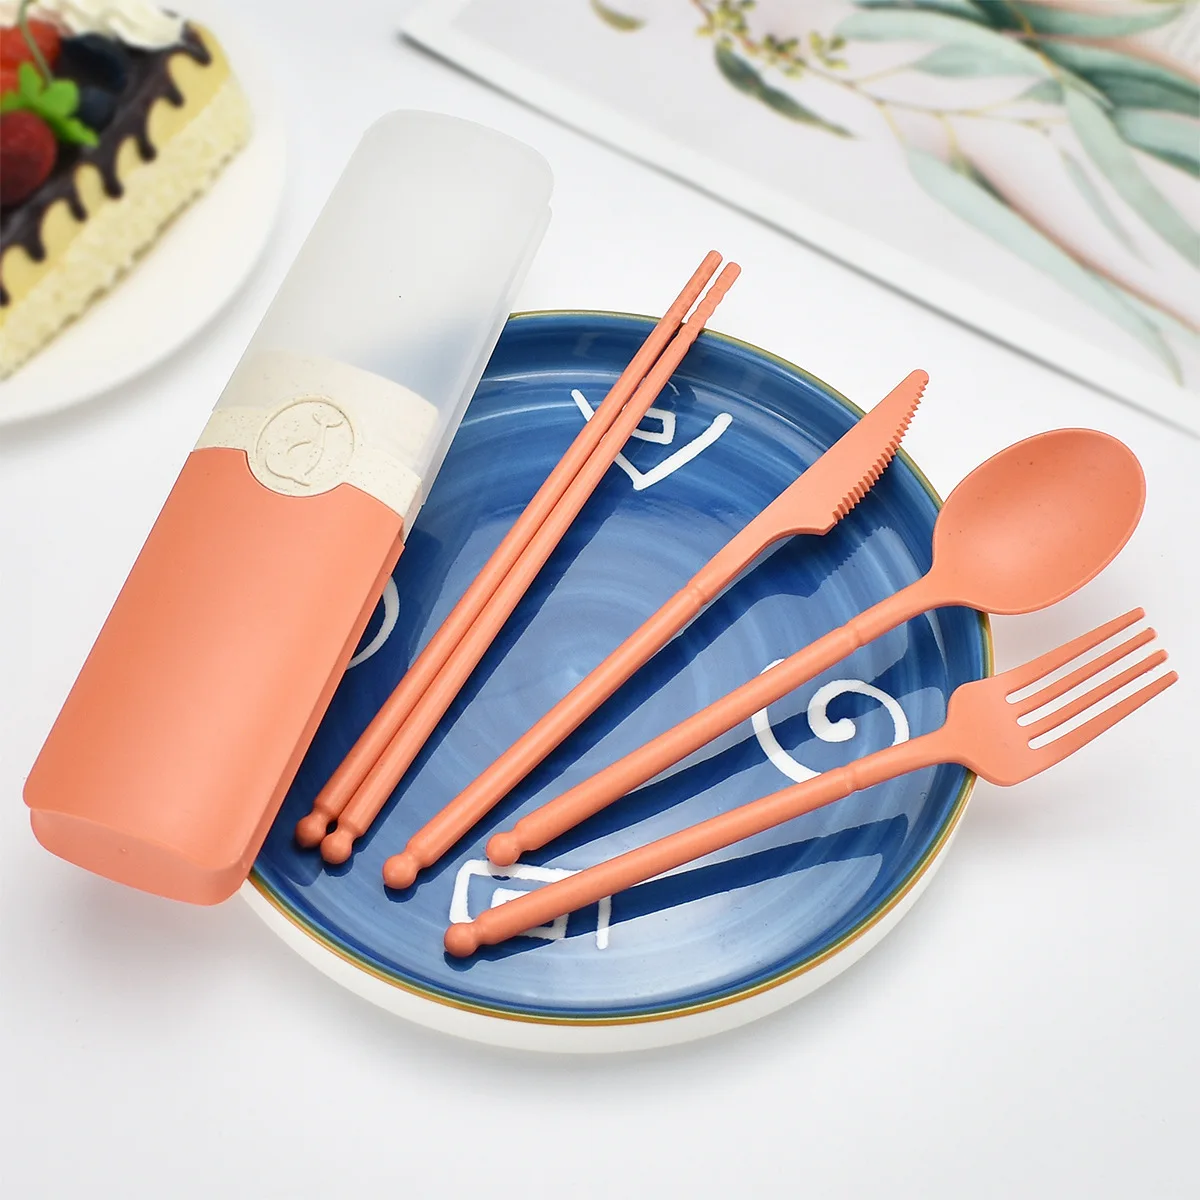 https://ae01.alicdn.com/kf/S021cea001d4d4aa6b74f678ab4e1f2cbH/Portable-Reusable-Spoon-Fork-Travel-Picnic-Chopsticks-Wheat-Straw-Tableware-Cutlery-Set-with-Carrying-Box-for.jpg